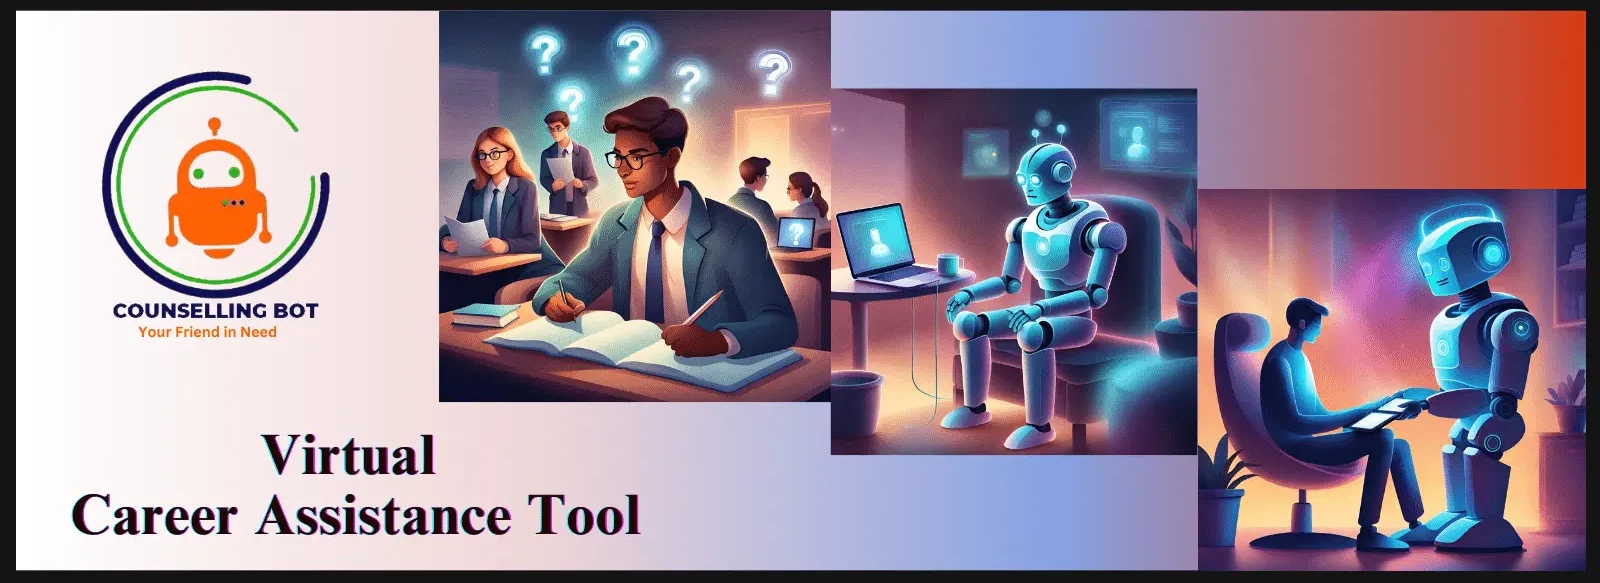 Counselling Bot - Virtual Career Assistance Tool